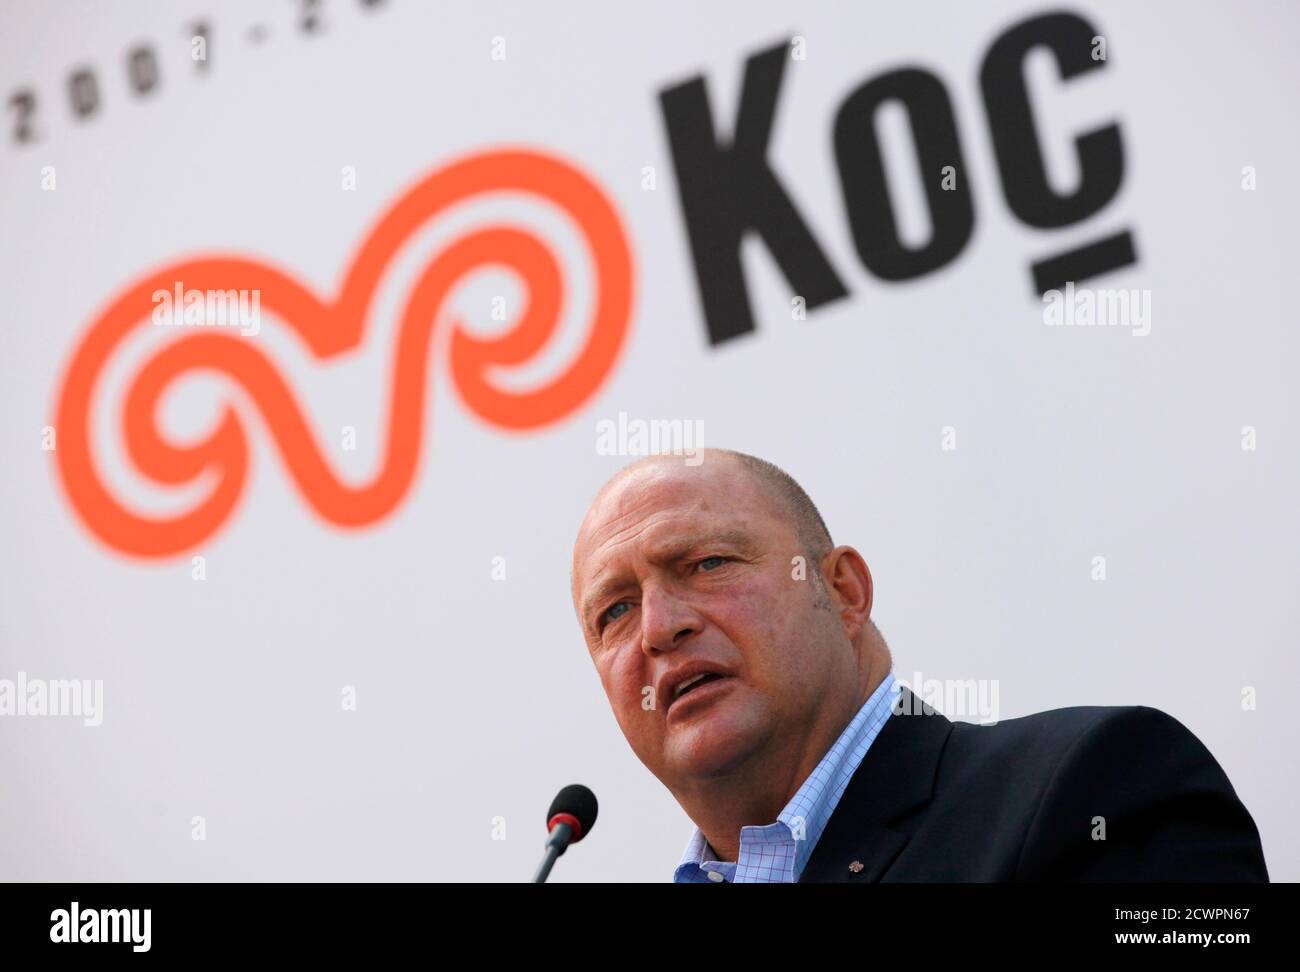 Koc Holding Chairman Mustafa Koc makes a speech during the opening ceremony of the 12th Istanbul Biennial September 15, 2011. The 12th Istanbul Biennial has been organised by the Istanbul Foundation for Culture and Arts (IKSV) and is sponsored by Koc Holding. The Istanbul Biennial will run until November 13. REUTERS/Murad Sezer (TURKEY - Tags: BUSINESS INDUSTRIAL SOCIETY ENTERTAINMENT) Stock Photo